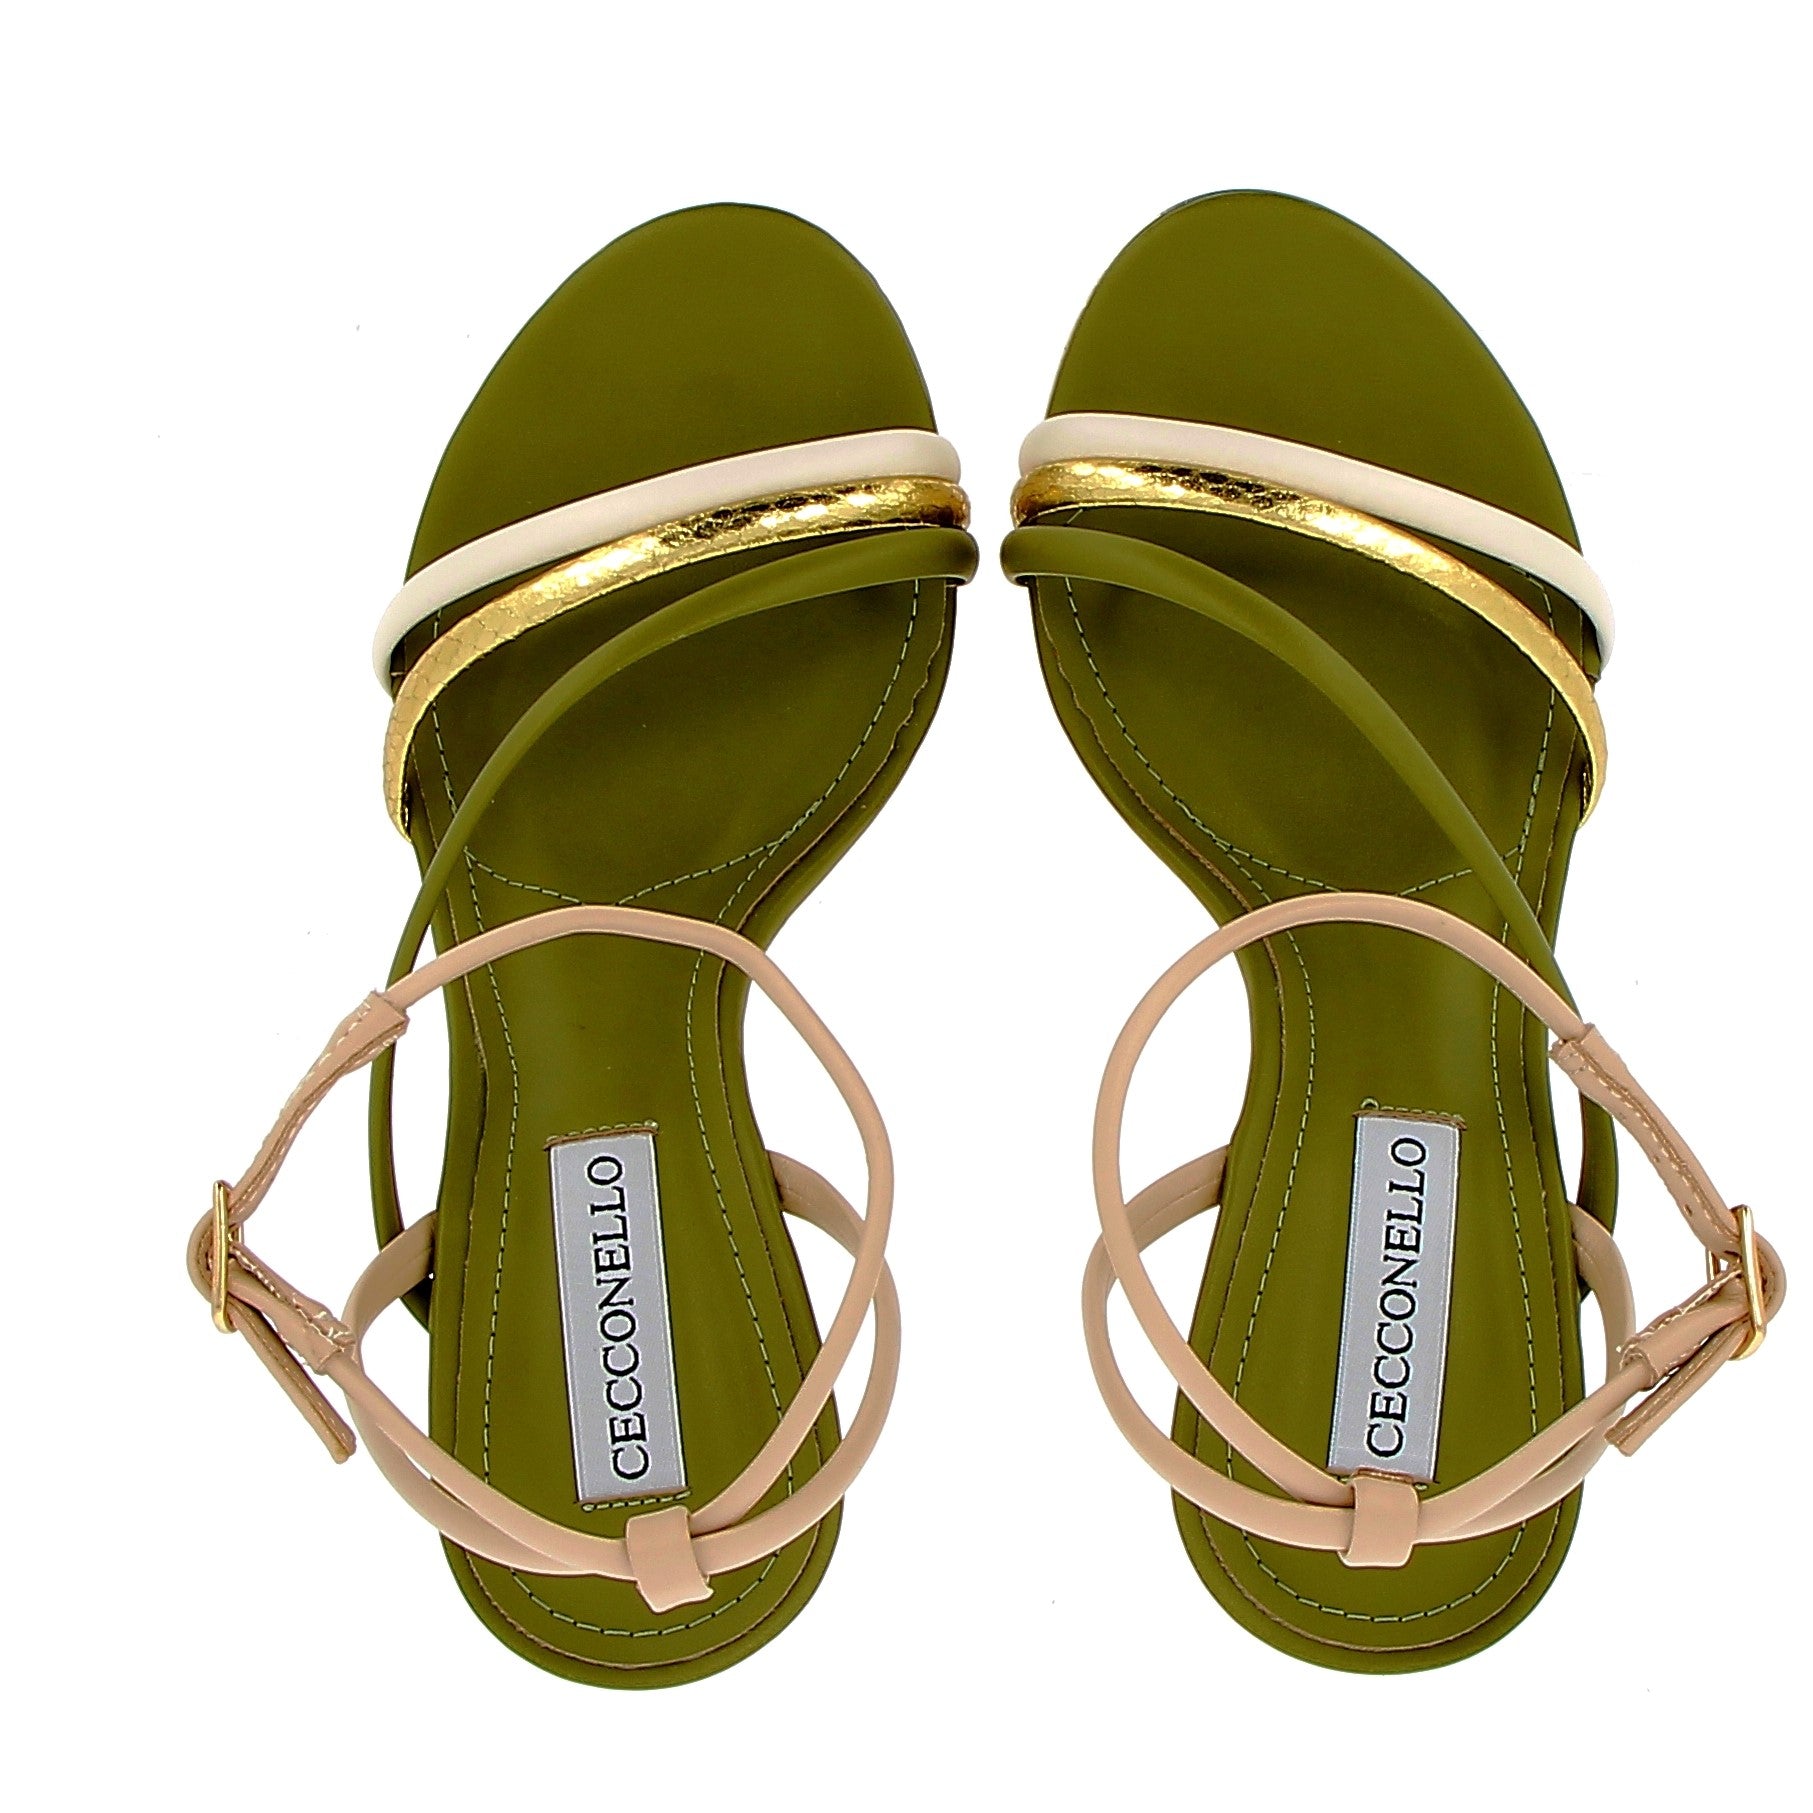 Green and gold high sandal on a gold background